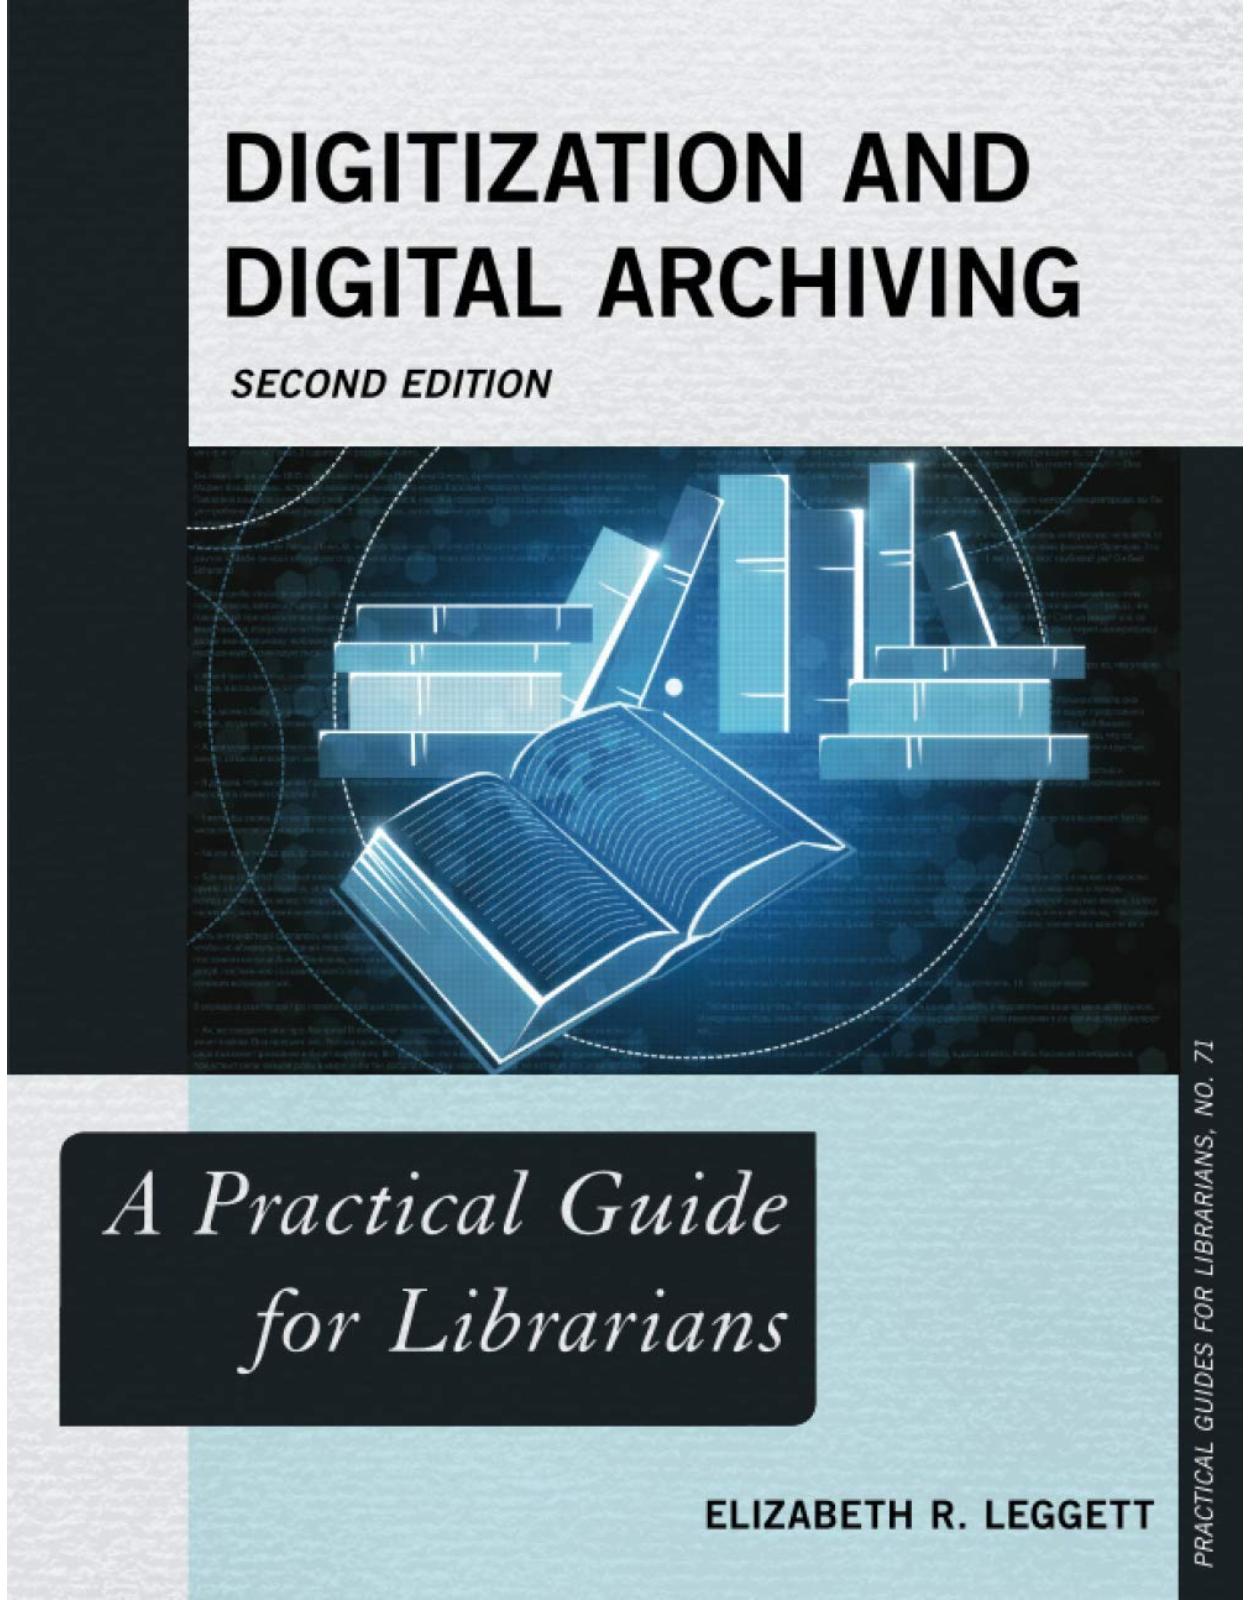 Digitization and Digital Archiving: A Practical Guide for Librarians, Second Edition: 71